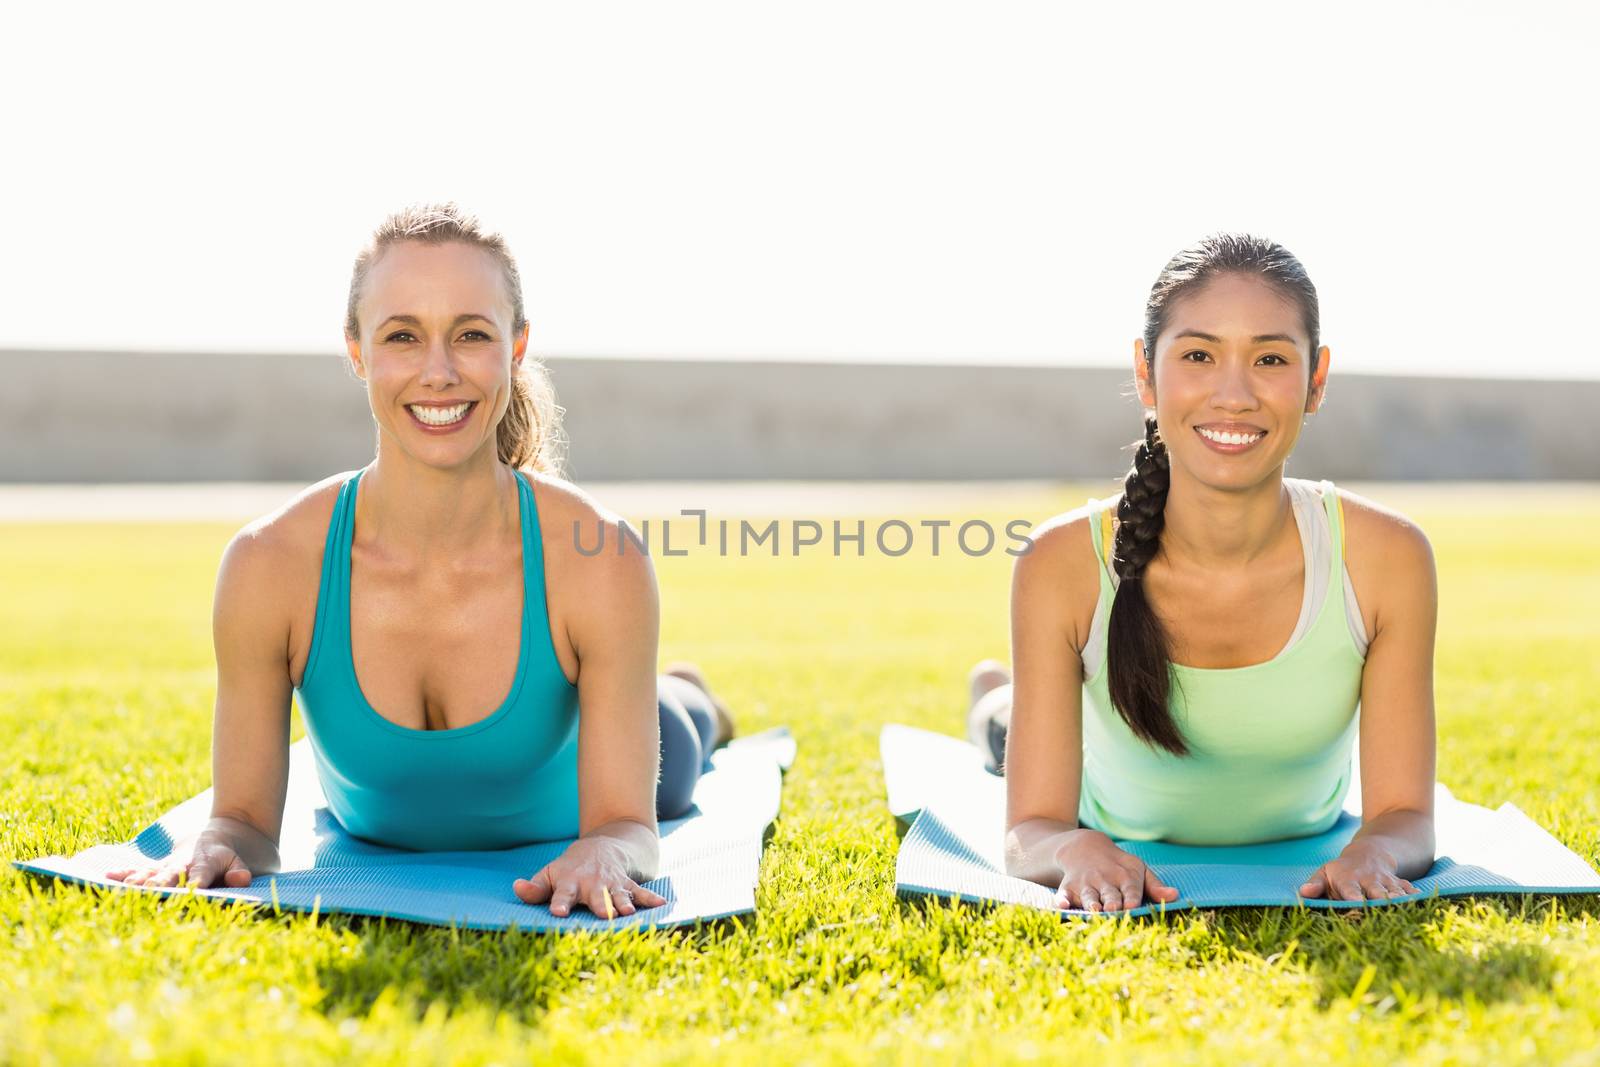 Smiling sporty women on exercise mats by Wavebreakmedia